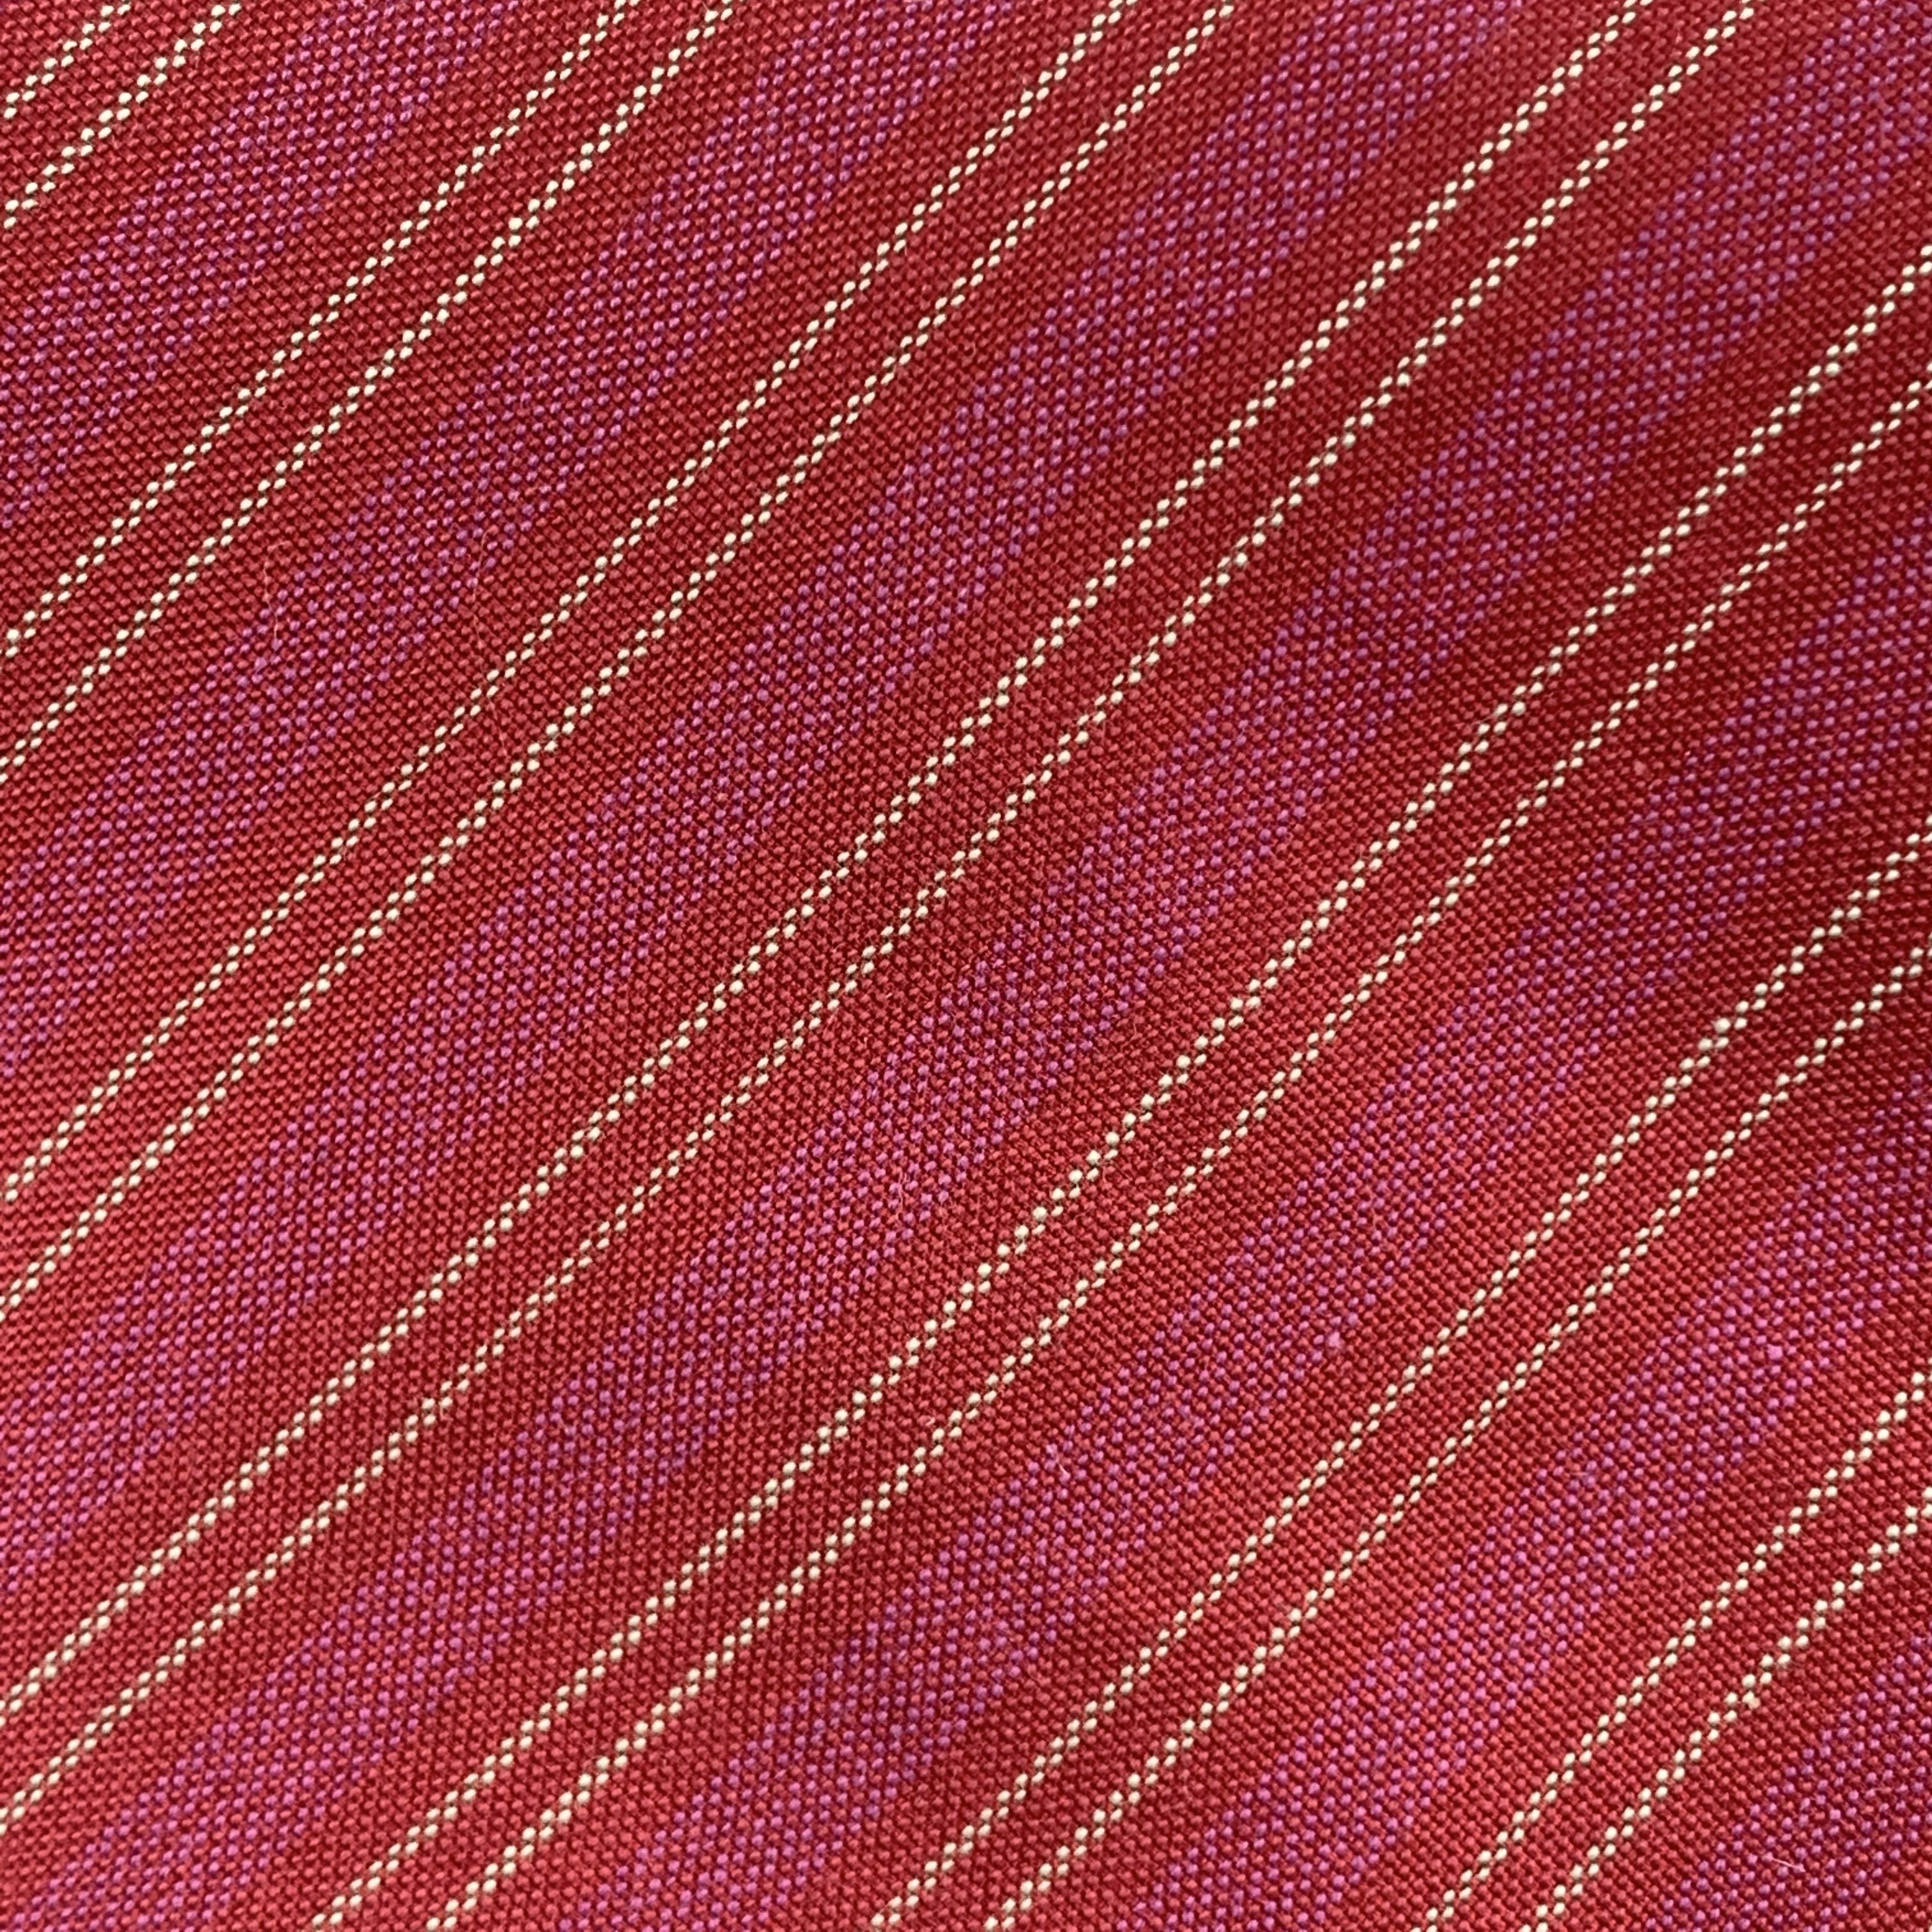 HERMES necktie comes in raspberry woven silk with all over red diagonal stripe print. Made in France.

Excellent Pre-Owned Condition.

Width: 3.5 in. 